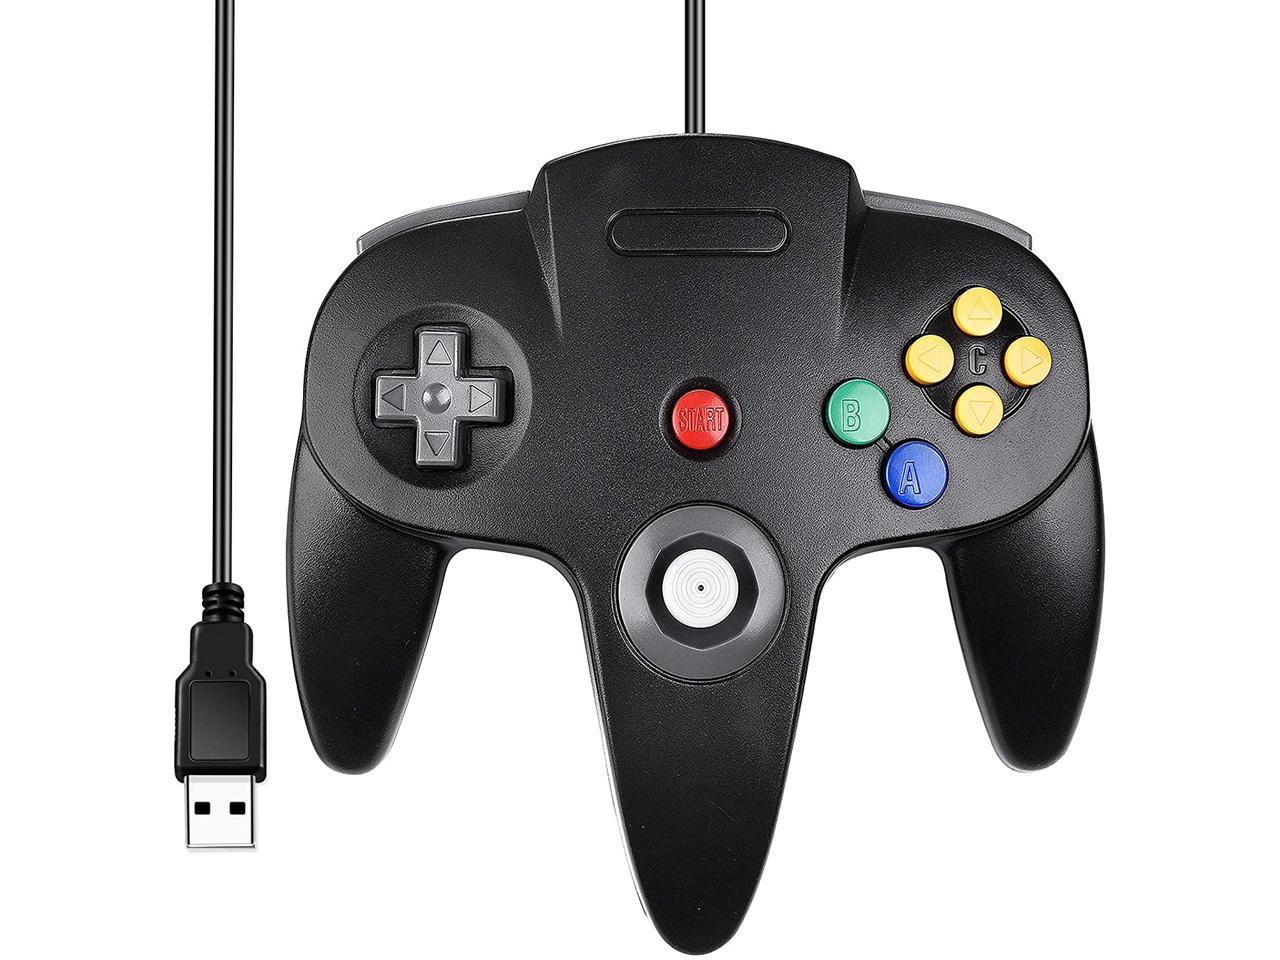 how to play multiplayer on n64 emulator for mac